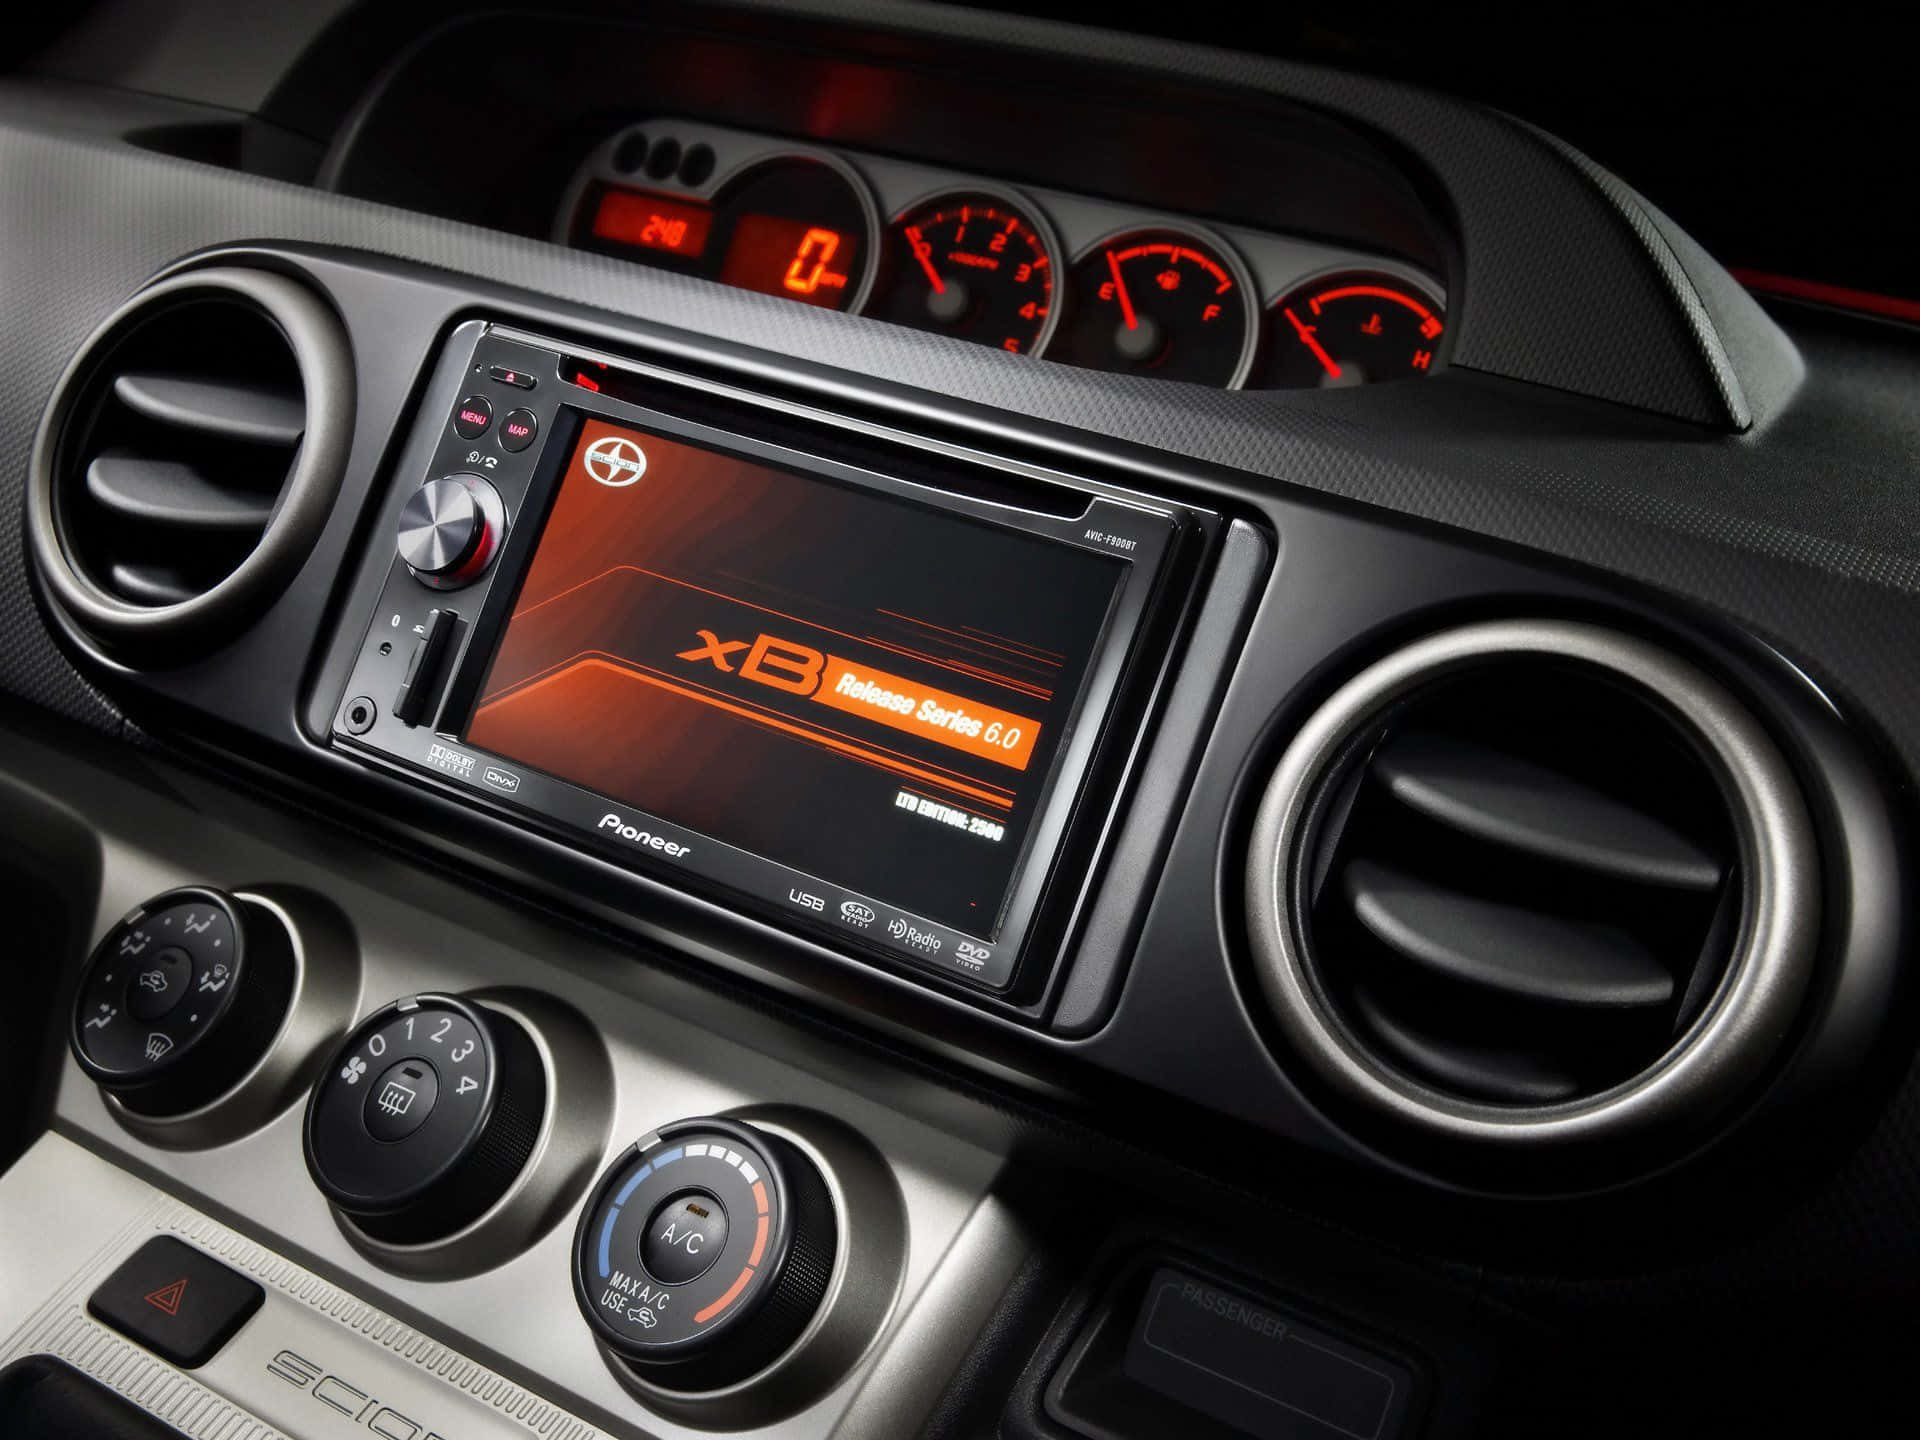 Car Stereo Pictures  Download Free Images on Unsplash